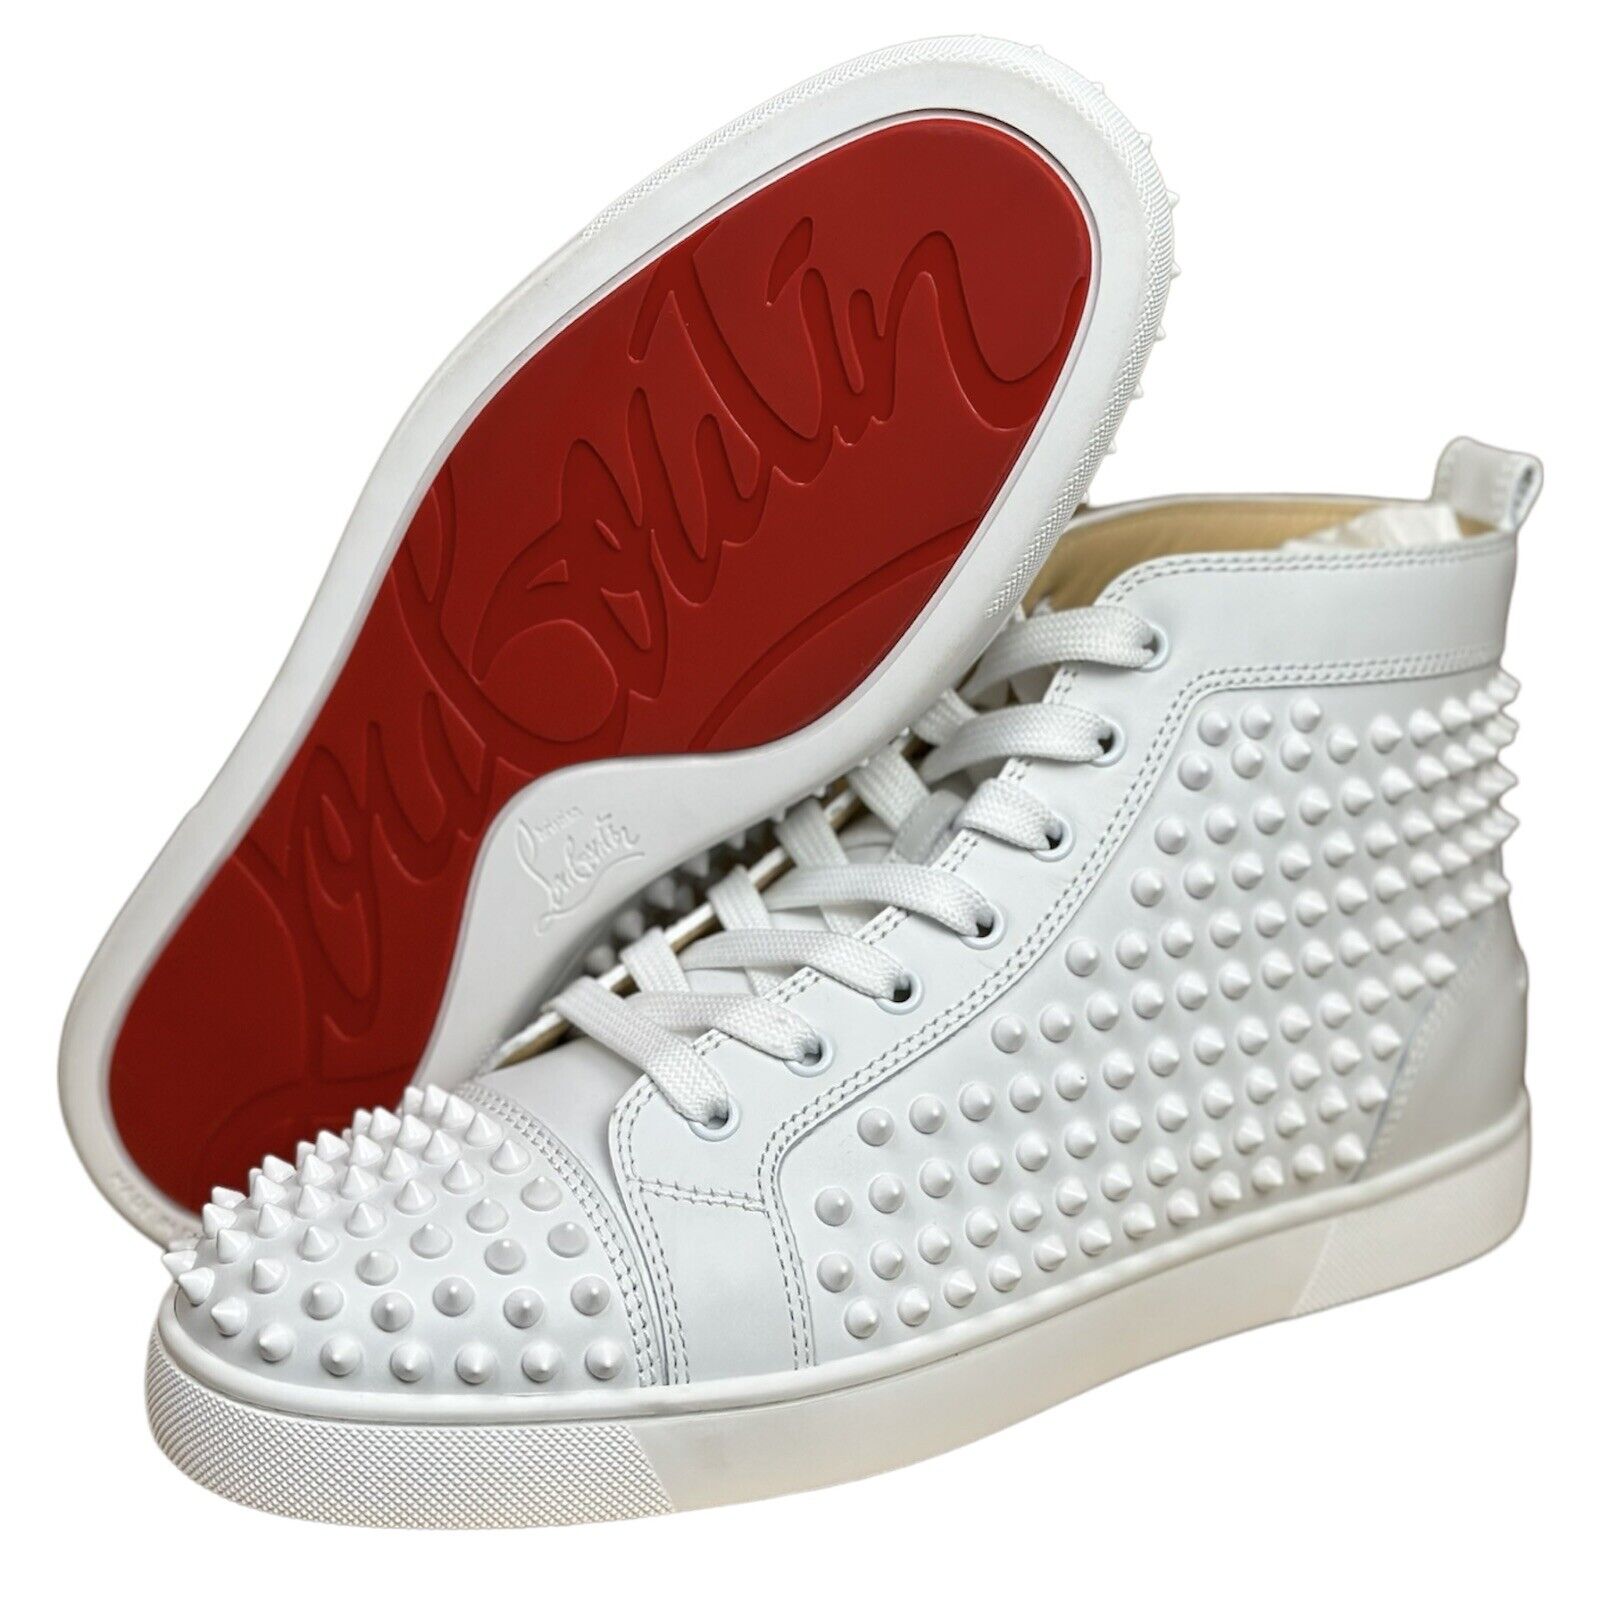 shoes, sneakers, red bottoms, spikes, fashion, red, white, gold